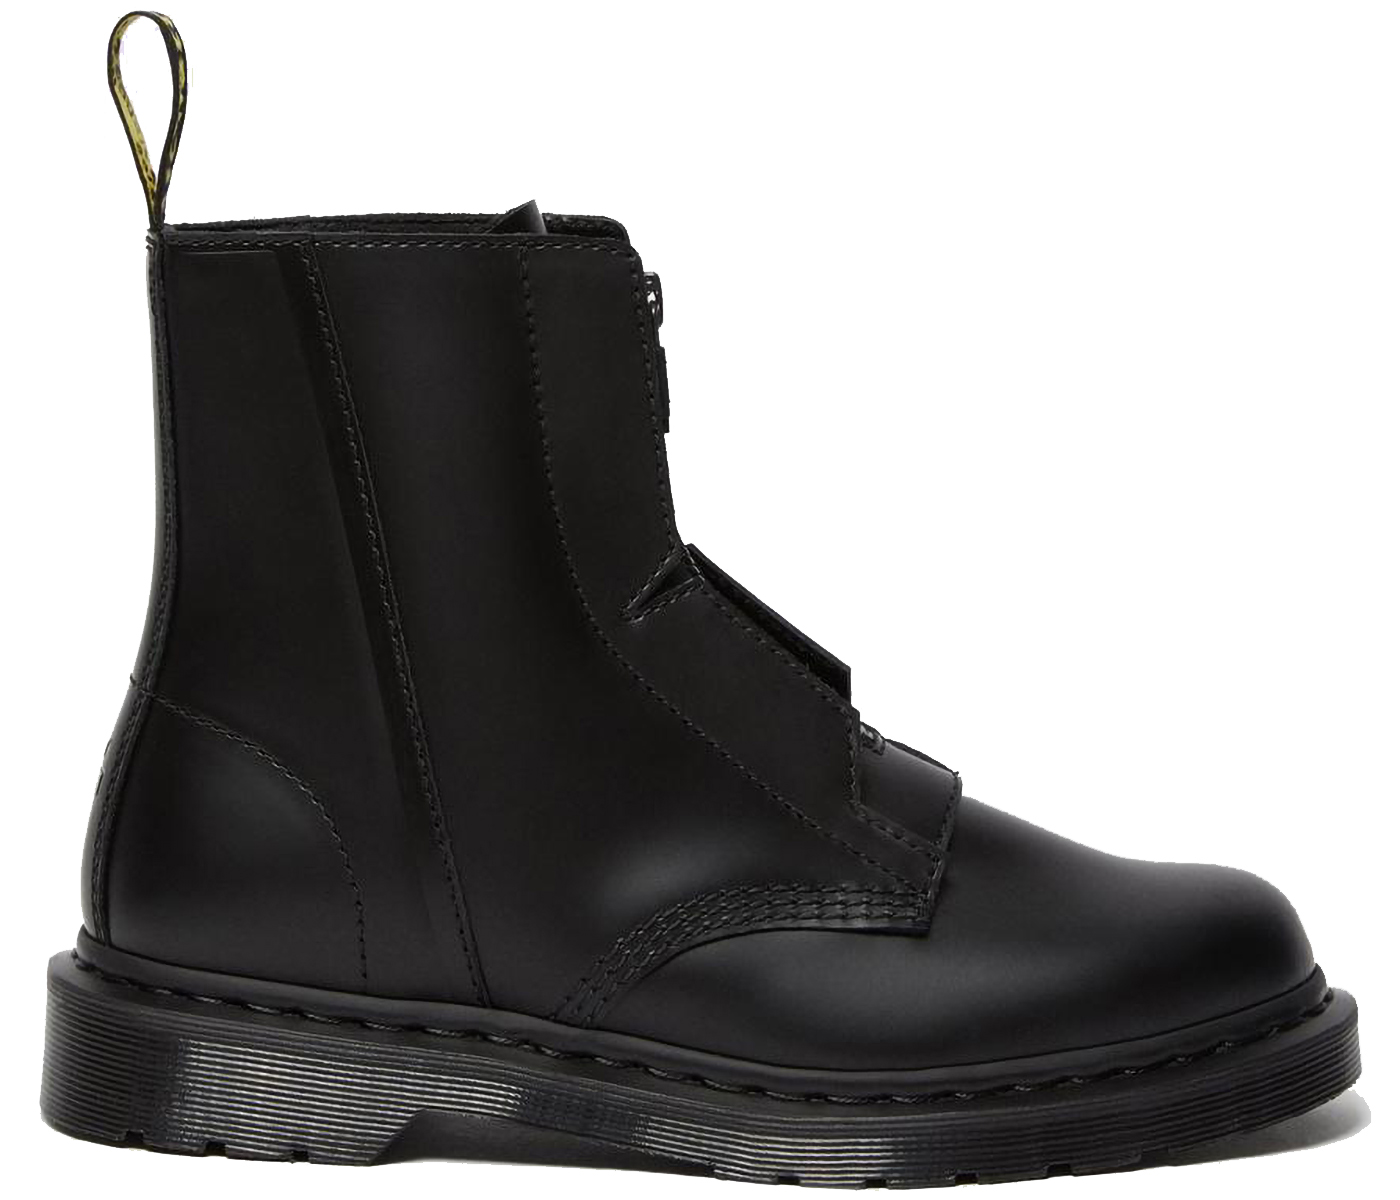 Dr.Martens 1460 A COLD WALL ZIP ブーツ UK5